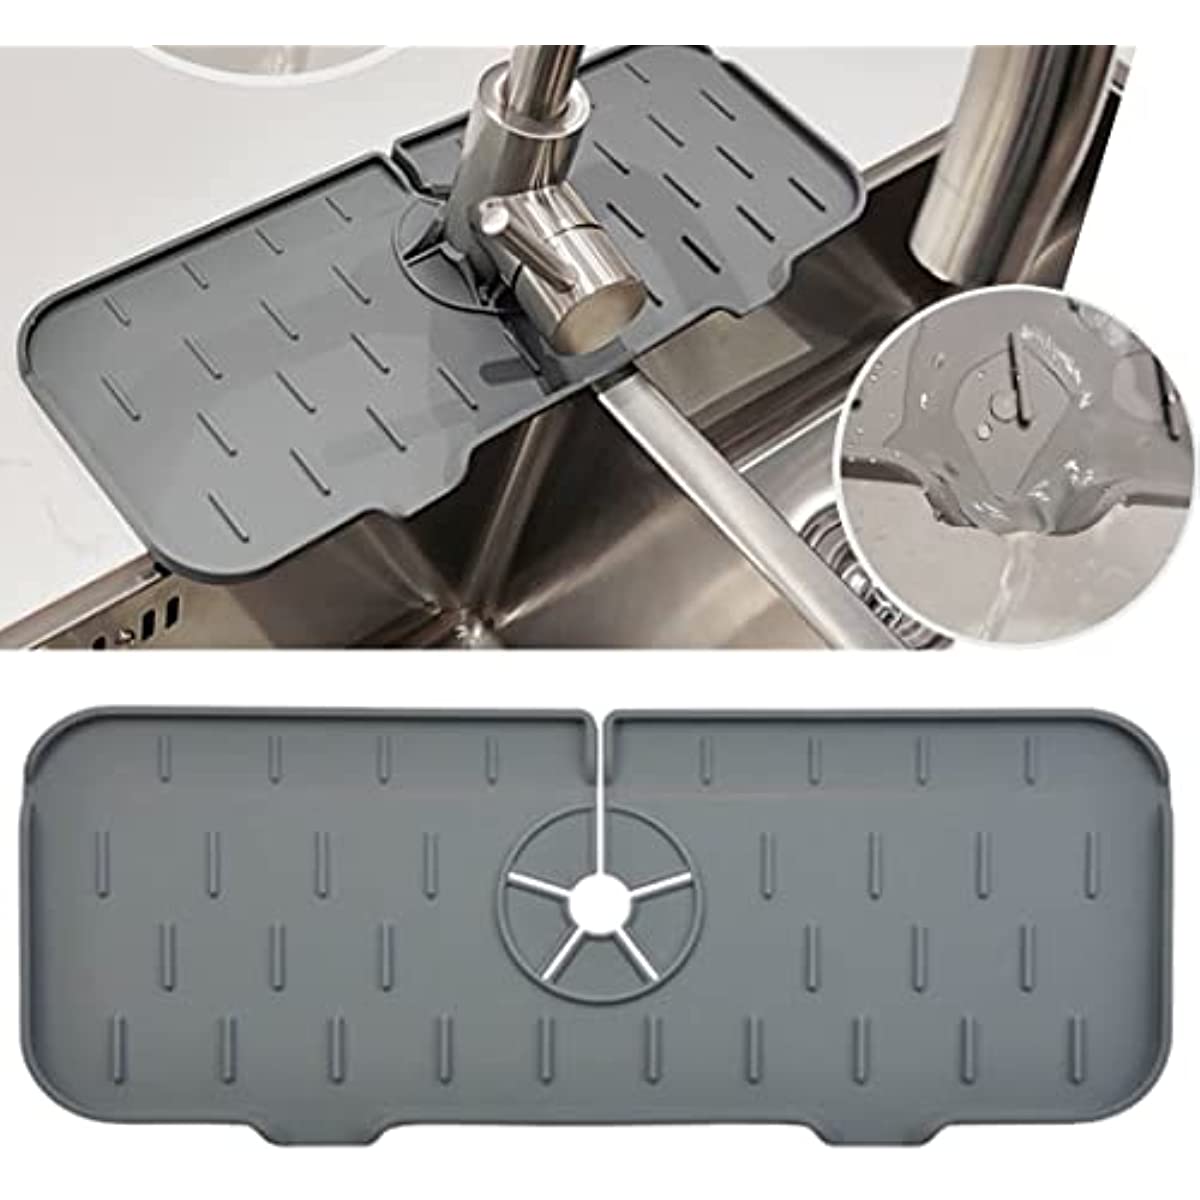 Sink Divider VELOVYO Sink Saddle Mat Ultra Thin Sink Protector Super Soft  Kitchen Sink Mat with Suction Cups No Smell Never Stain Durable